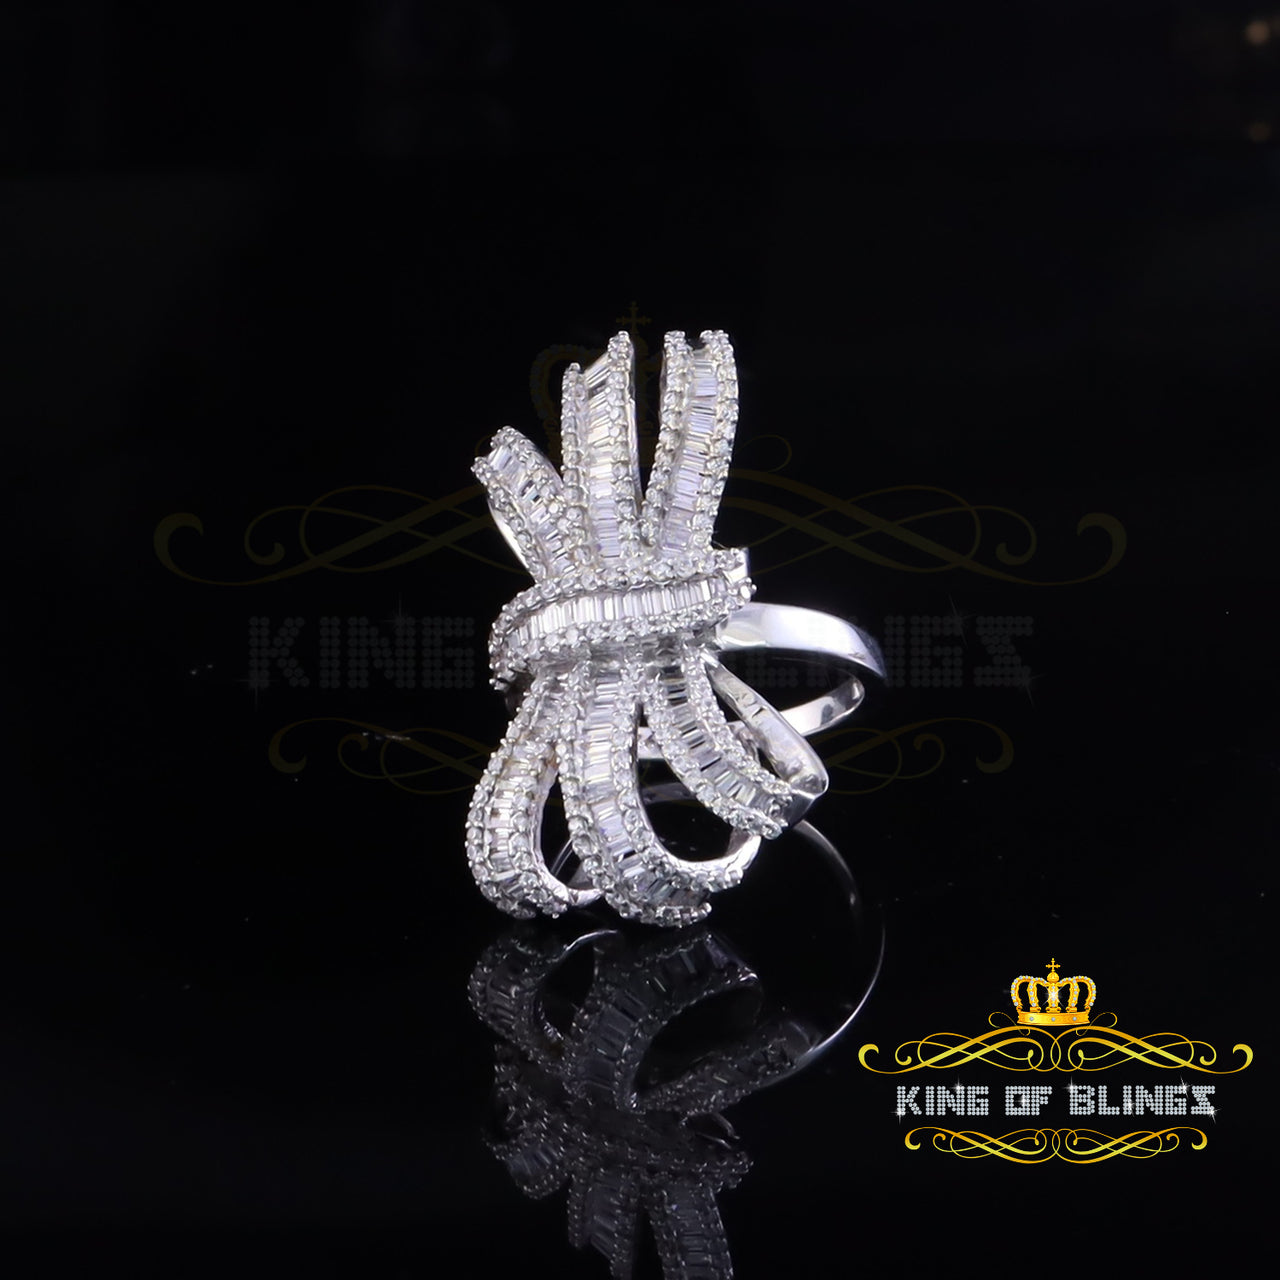 King Of Bling's925 Silver Cocktail Ring In White 4.20ct Cubic Zirconia Women's Ring Size 9